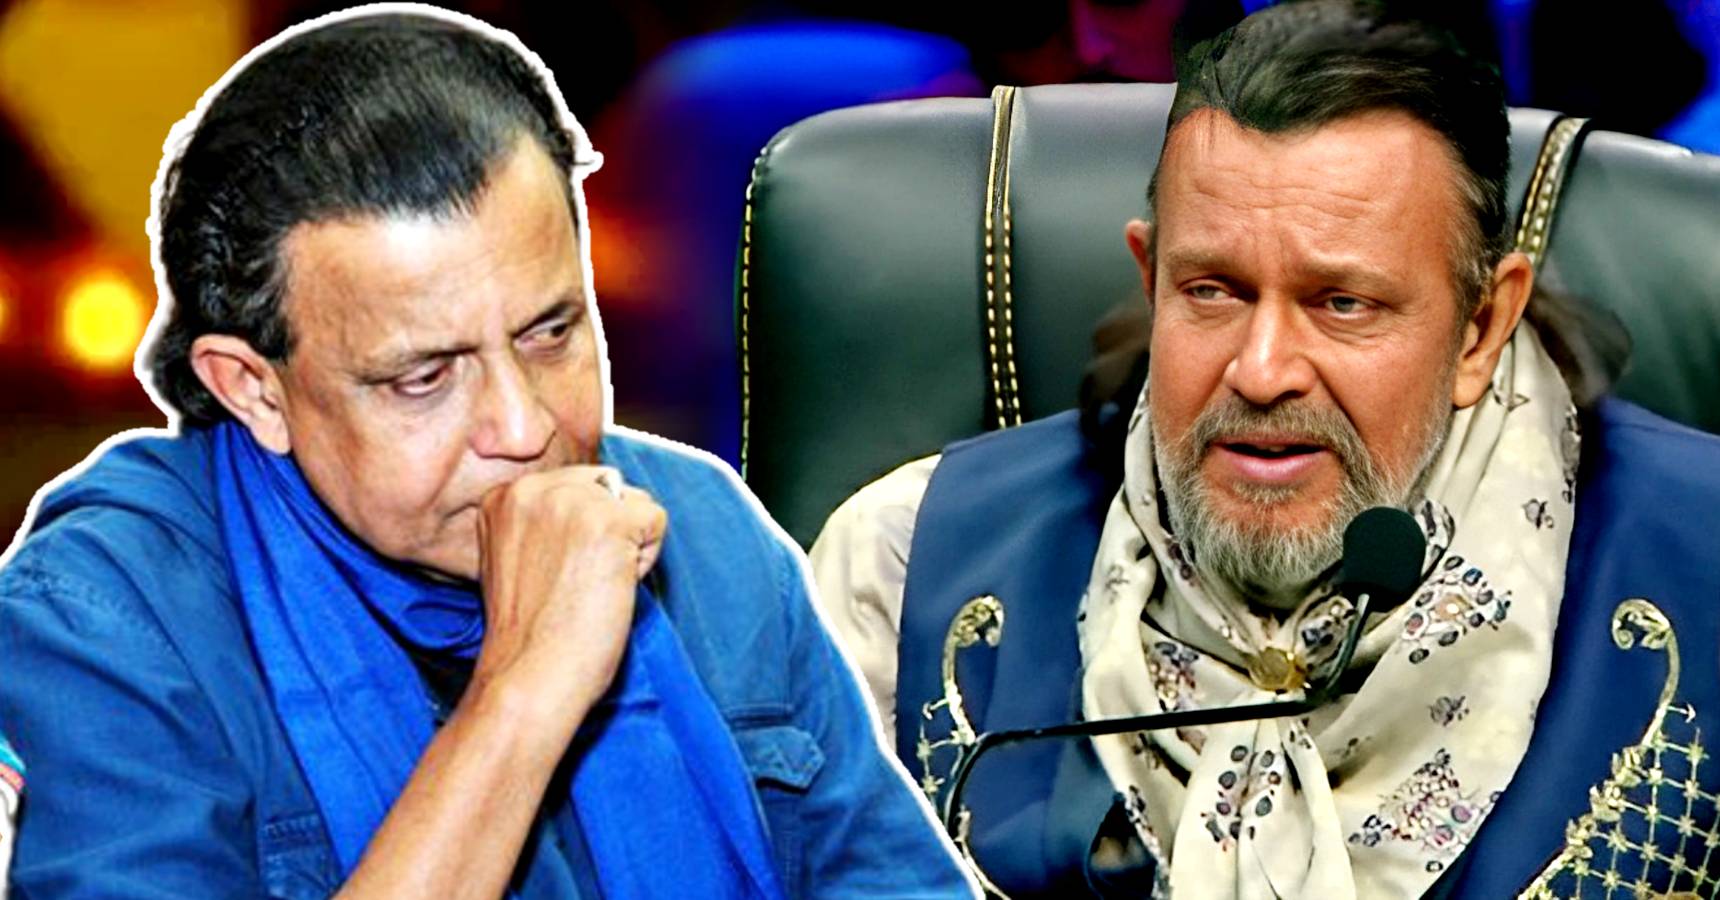 Bollywood actor Mithun Chakraborty opens up about his loneliness